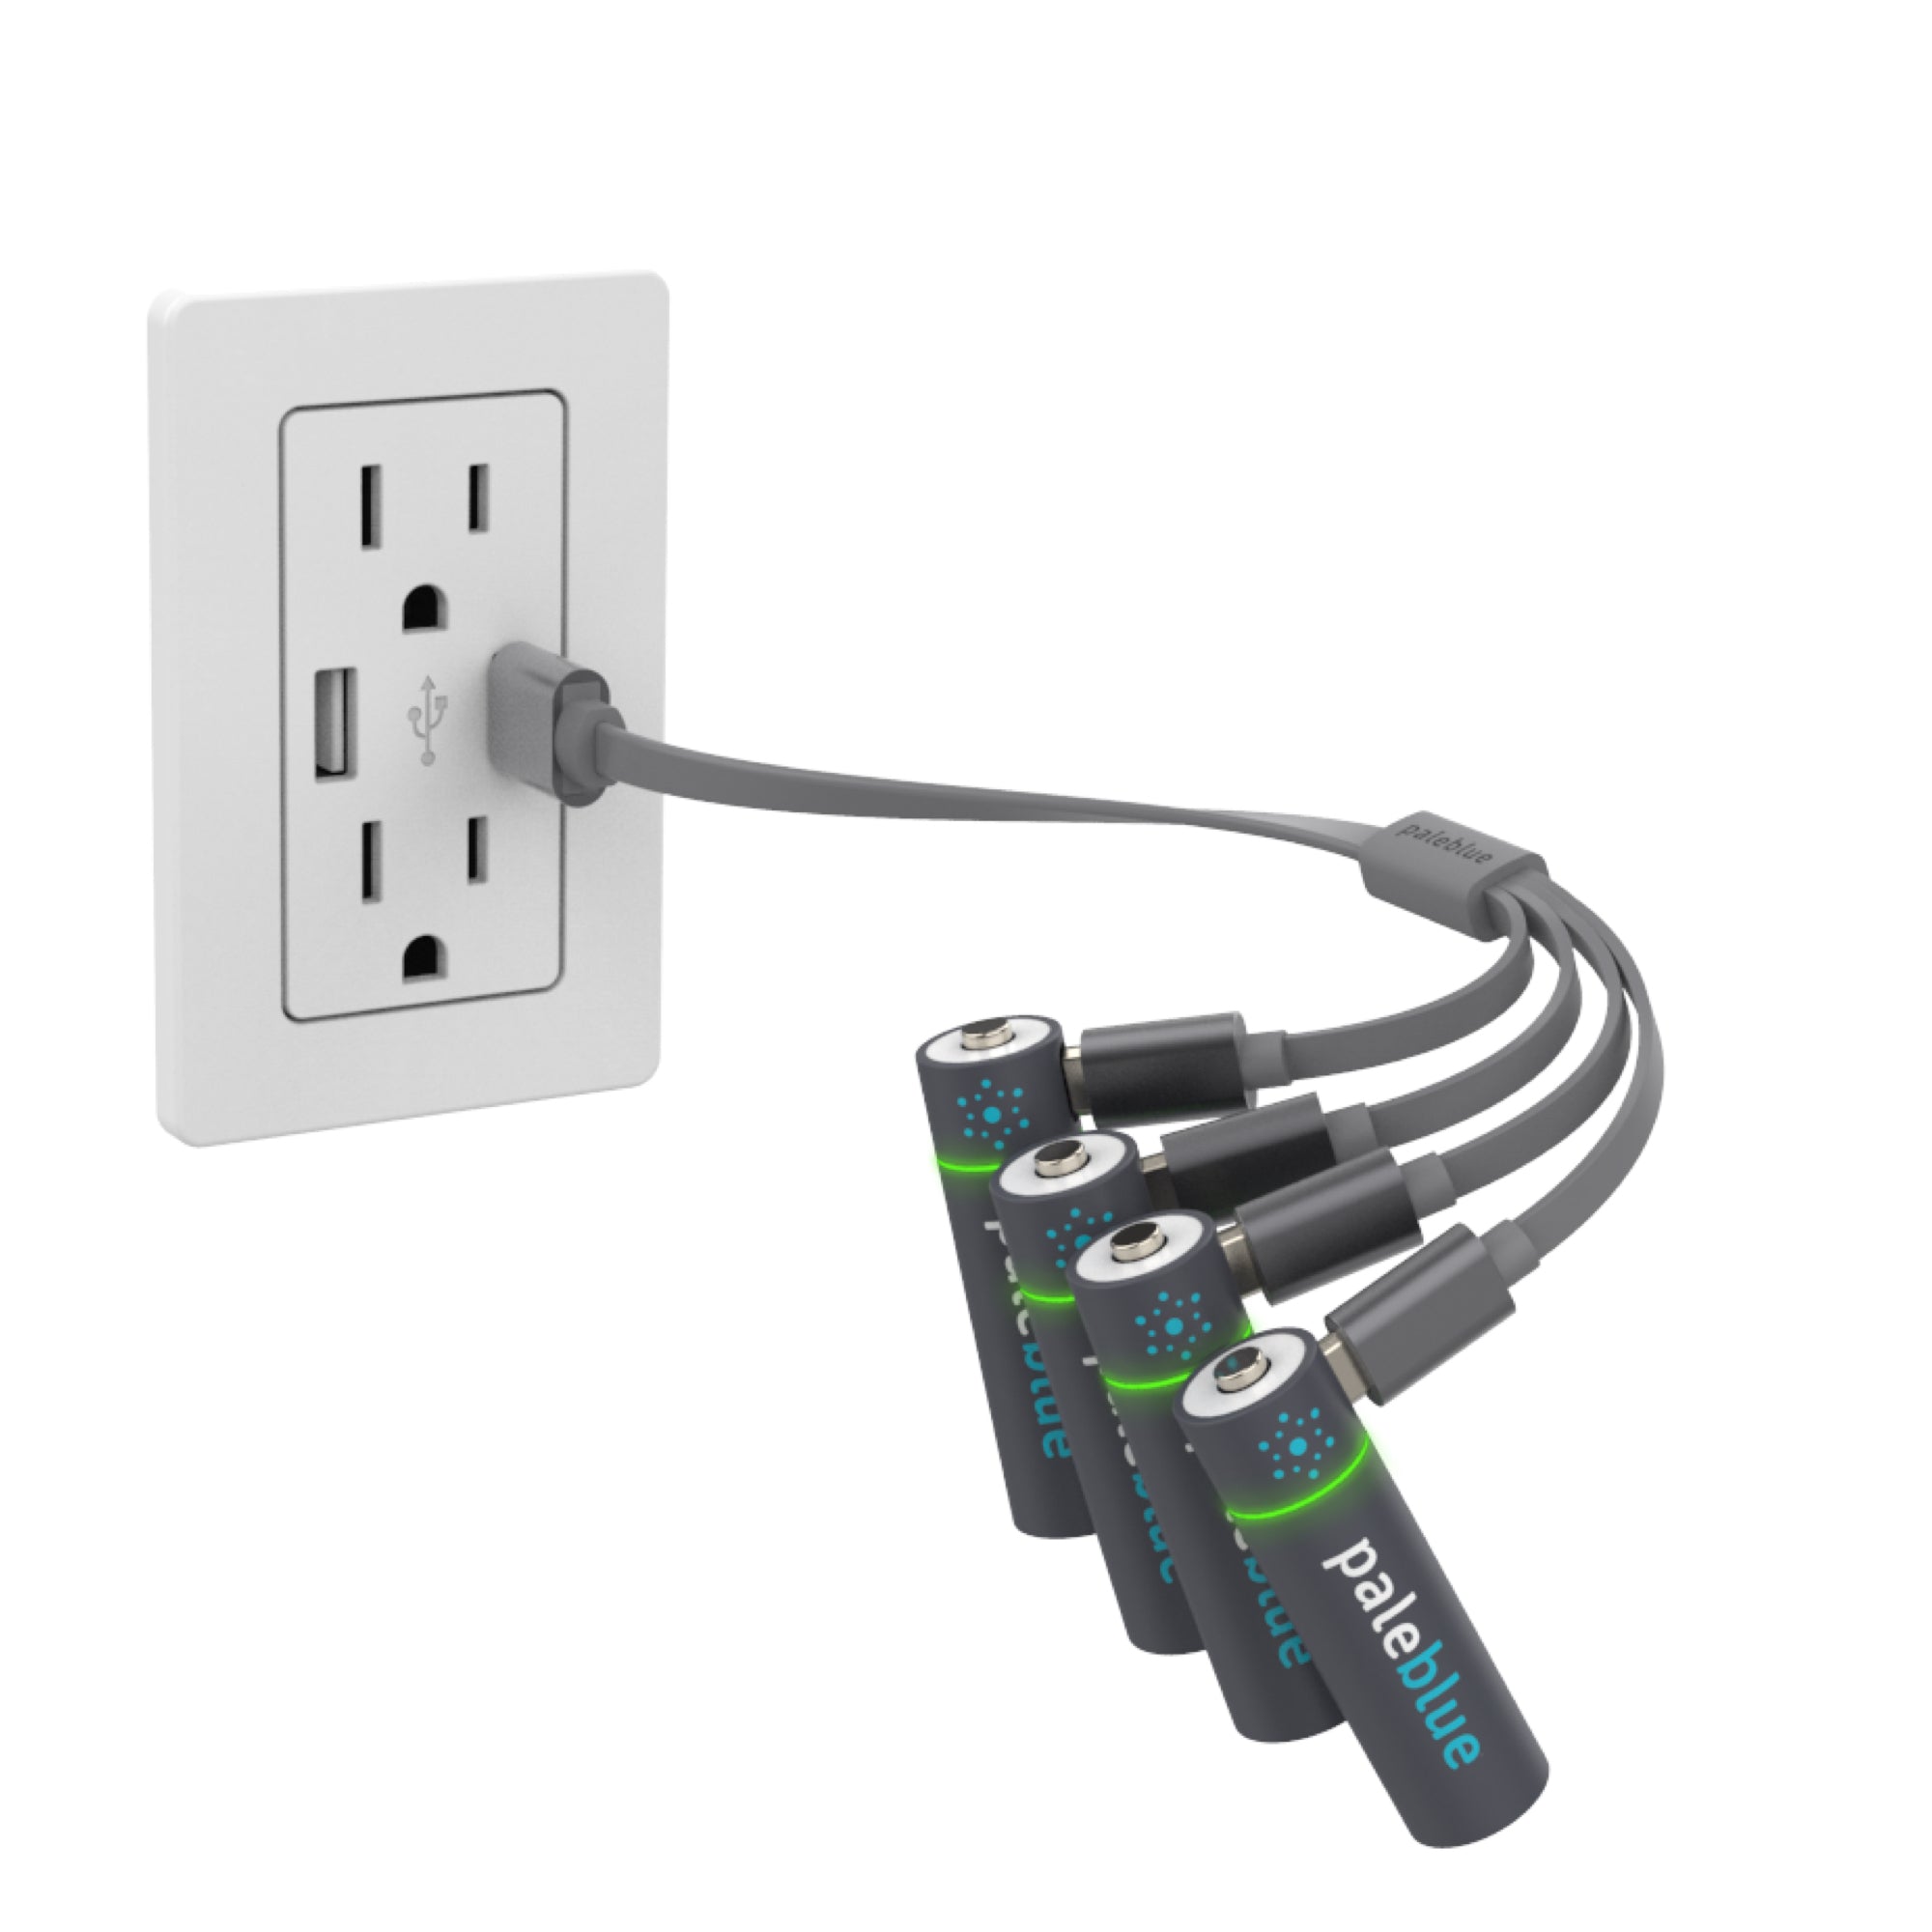 Four Paleblue AA batteries plugged into a wall outlet via a USB cable